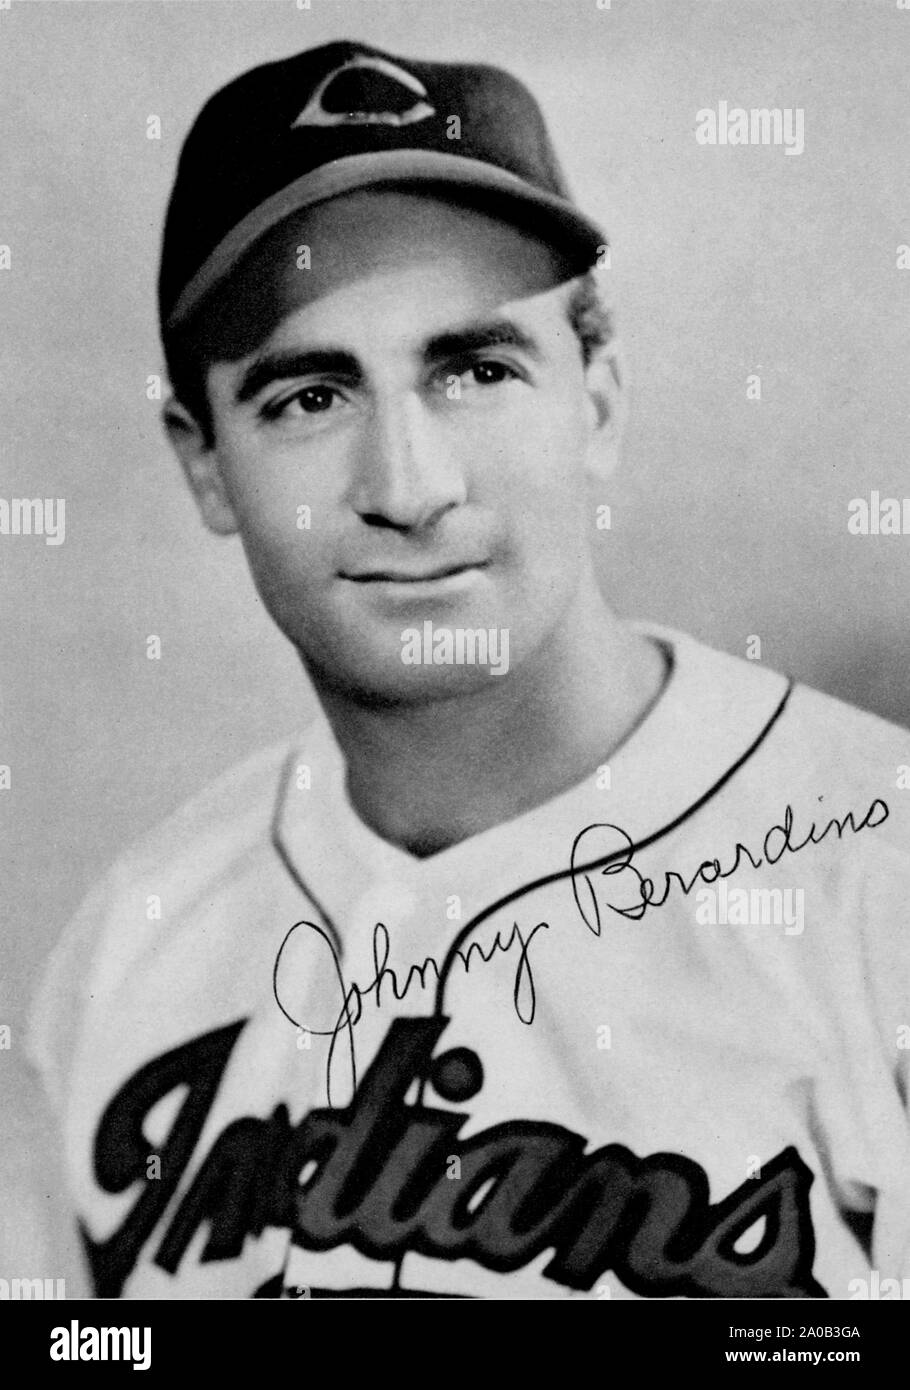 Vintage photograph of baseball player Johnny Beradino who played with the Cleveland Indians in the 1940s and 50s and later became an actor appearing on the hit TV show General Hospital . Stock Photo